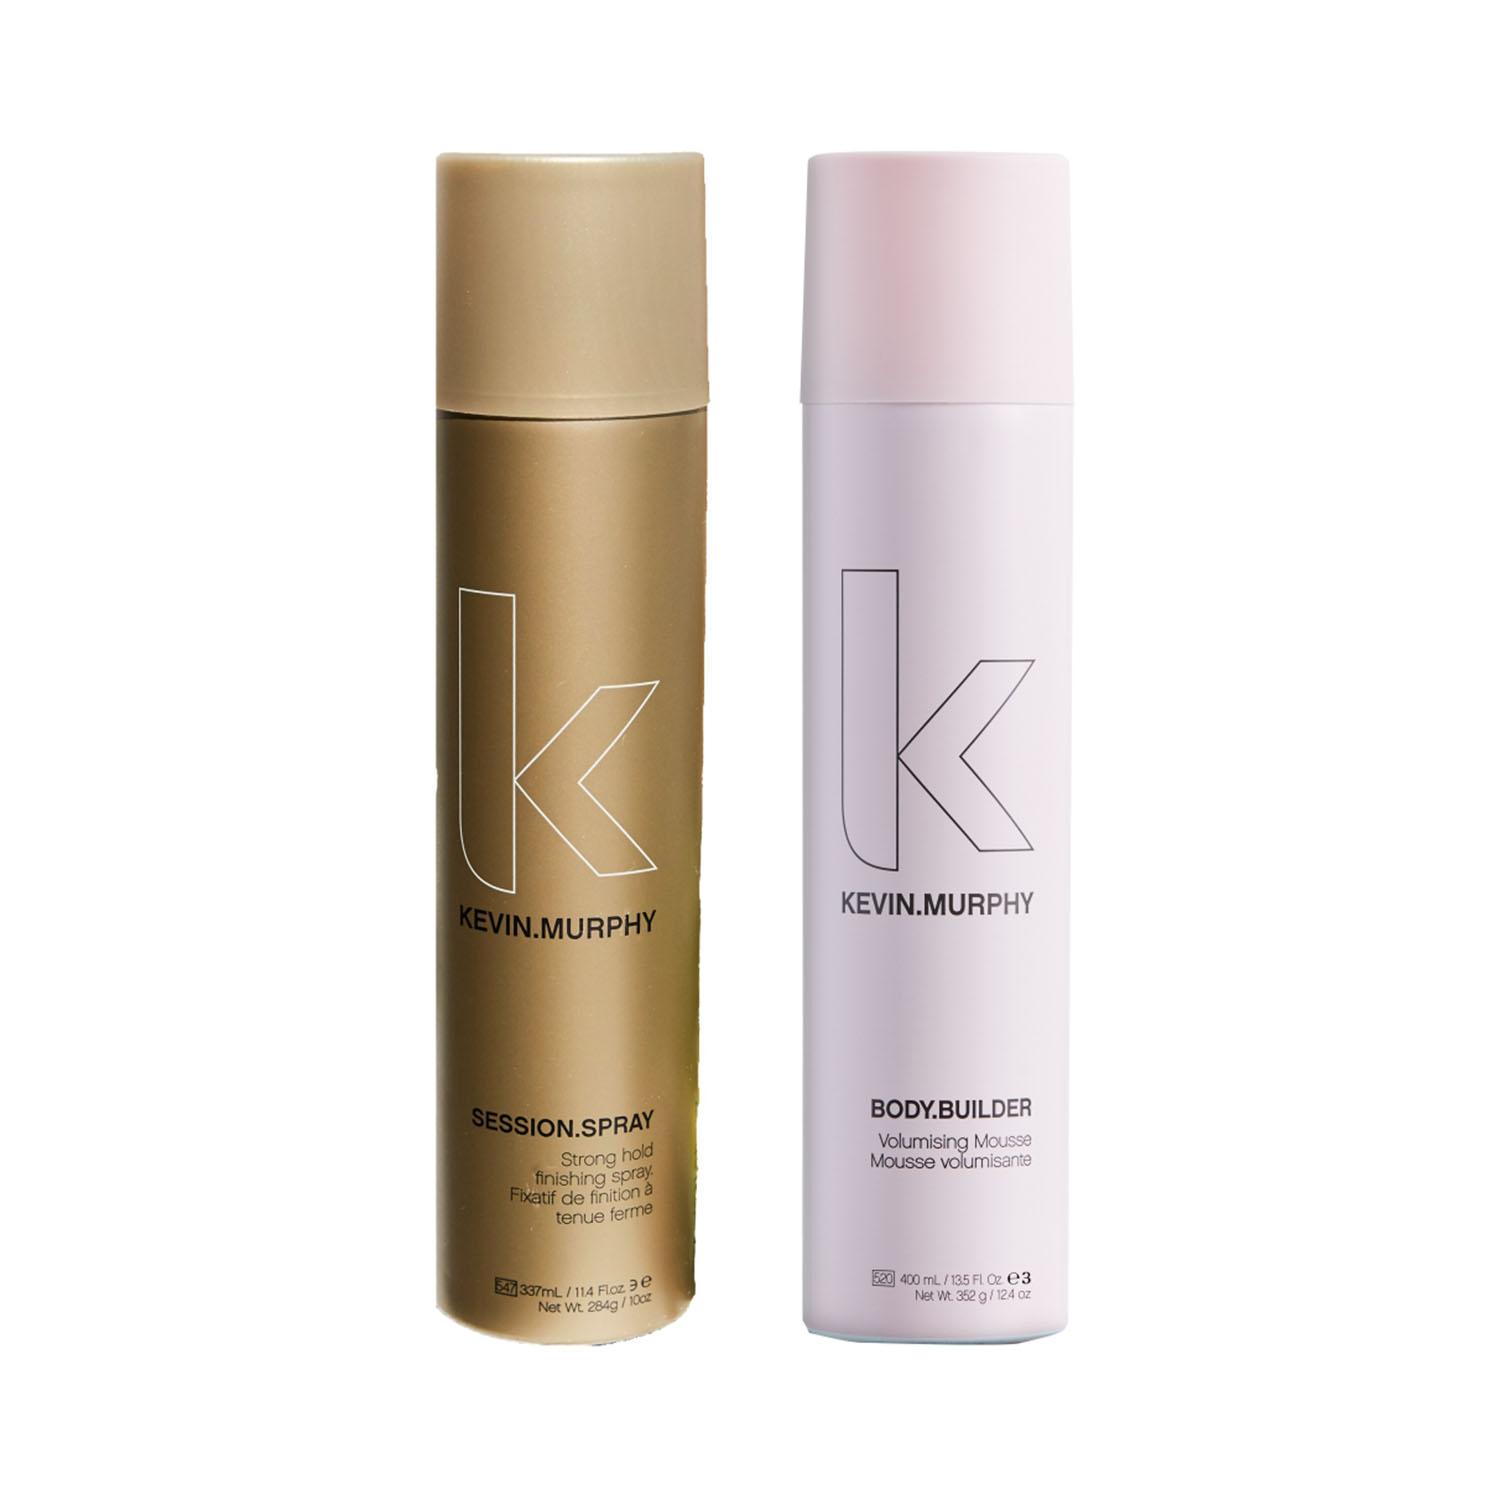 Kevin Murphy | Kevin Murphy Body Builder and Session Spray  Body and Hold Master Combo